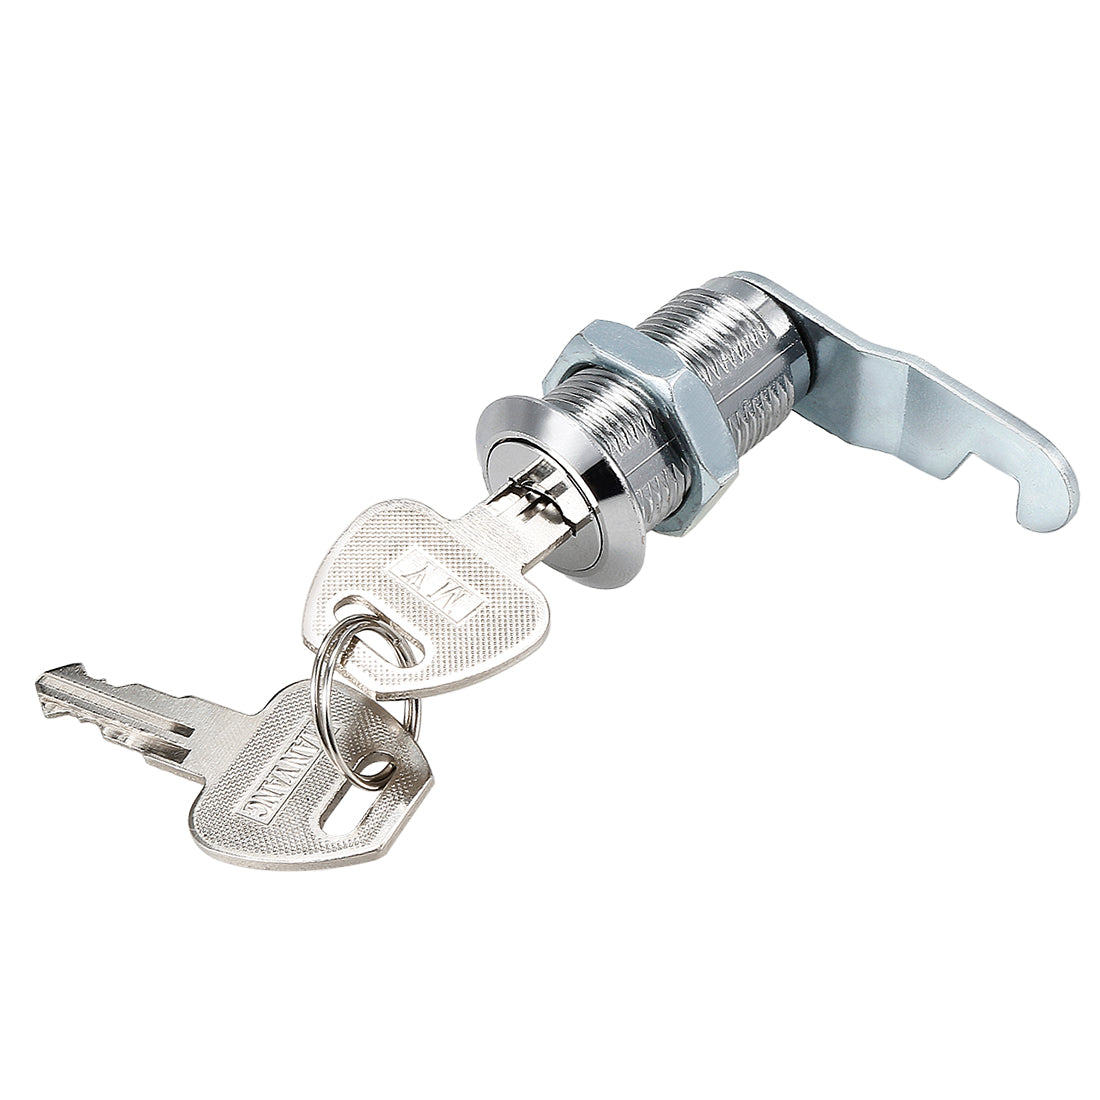 uxcell Uxcell 1-1/8" Cylinder Zinc Alloy Chrome Plated Hooked Cam Lock w Key, Keyed Different